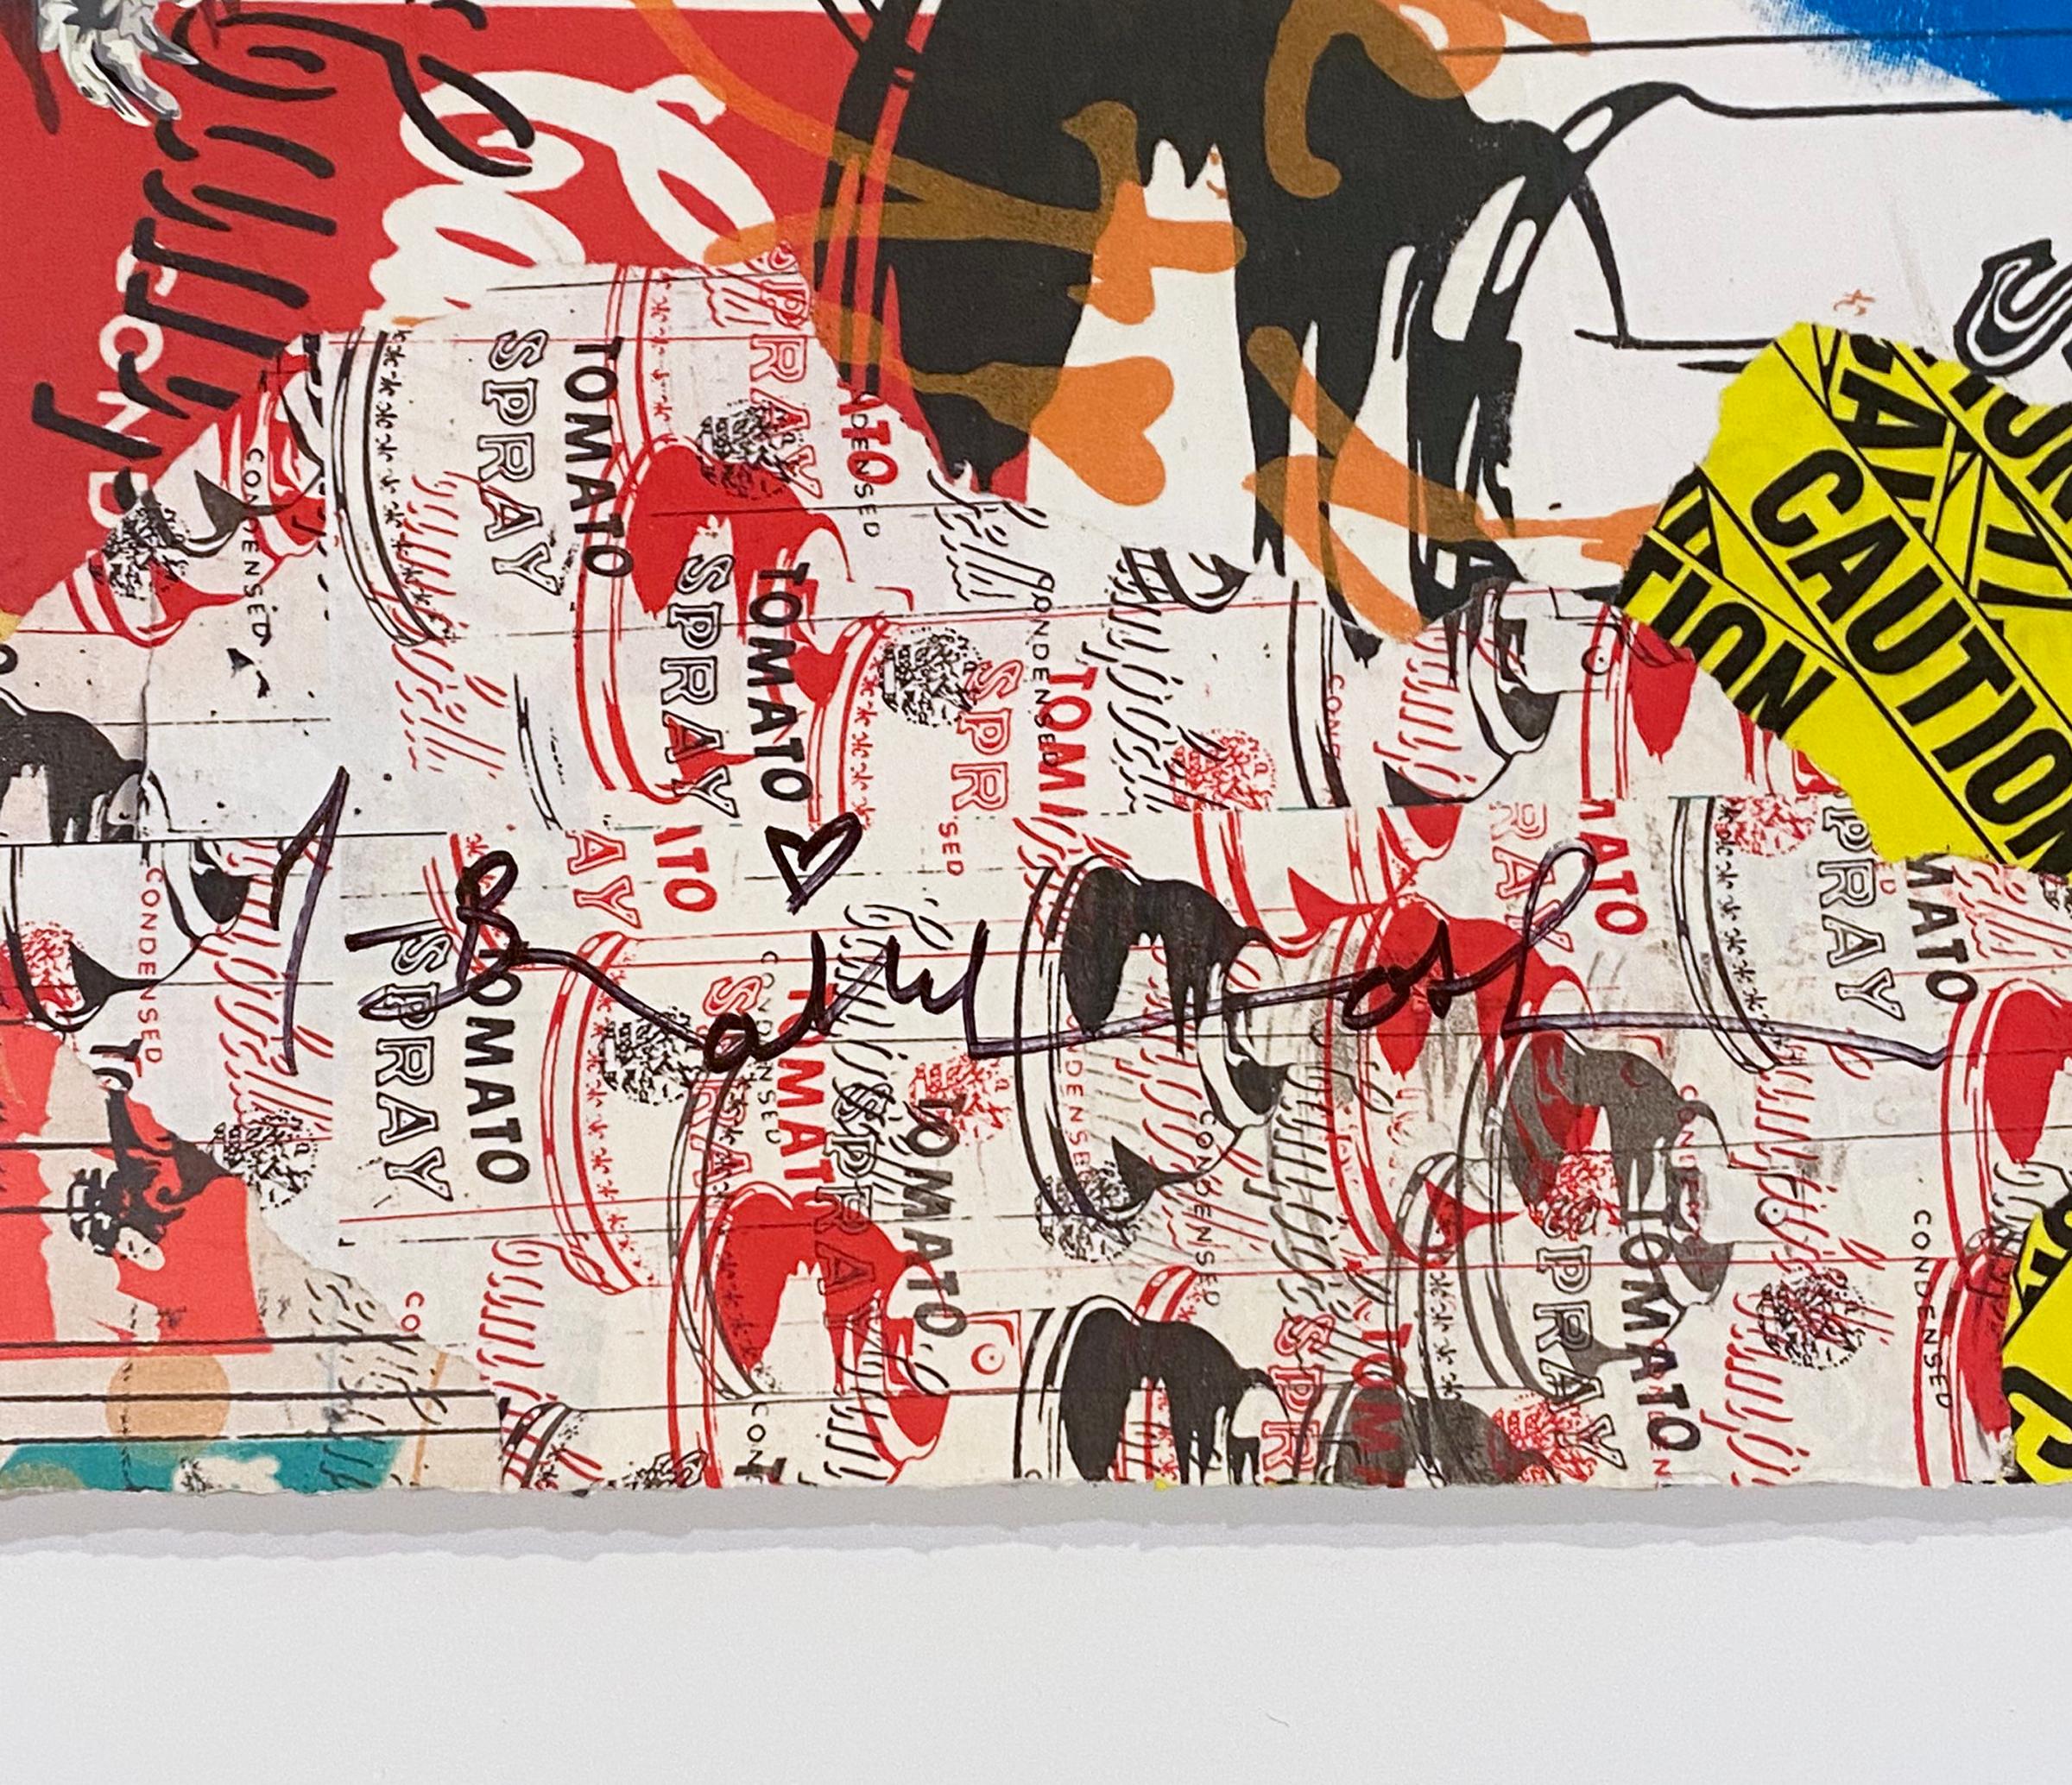 Work Well Together - Contemporary Print by Mr. Brainwash